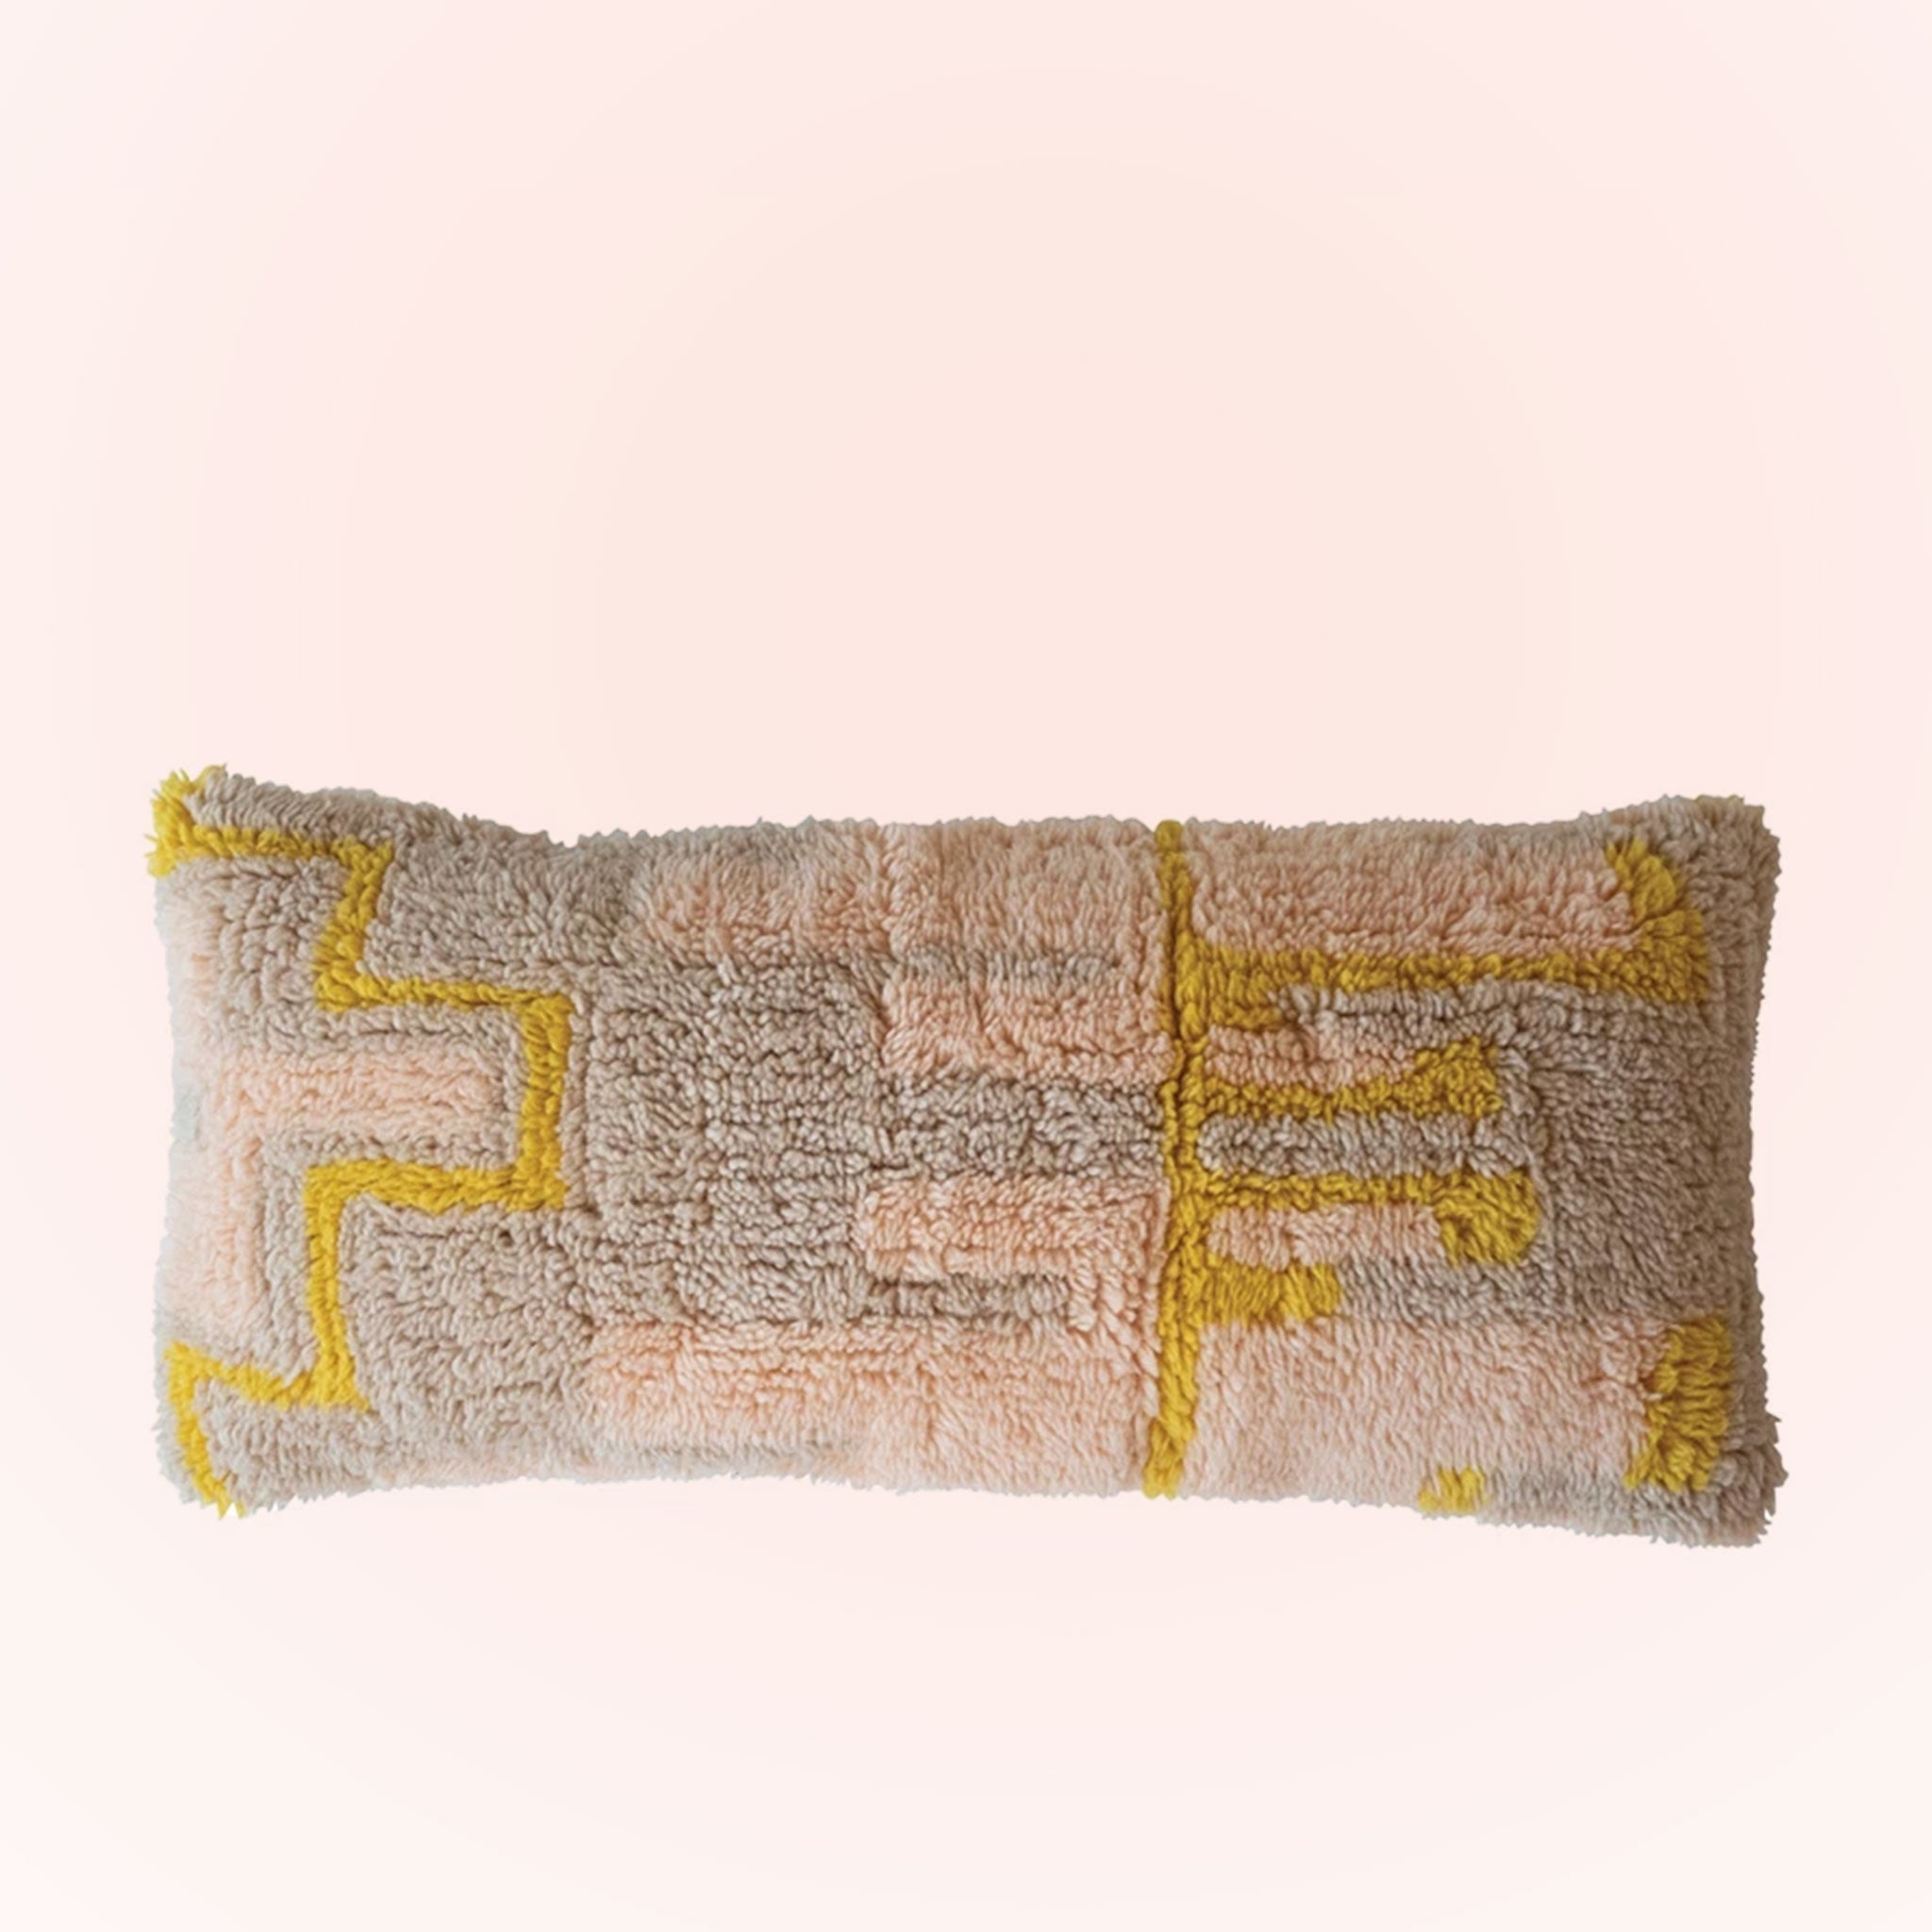 On a pink background is a tan, pink and yellow geometric printed lumbar pillow. 